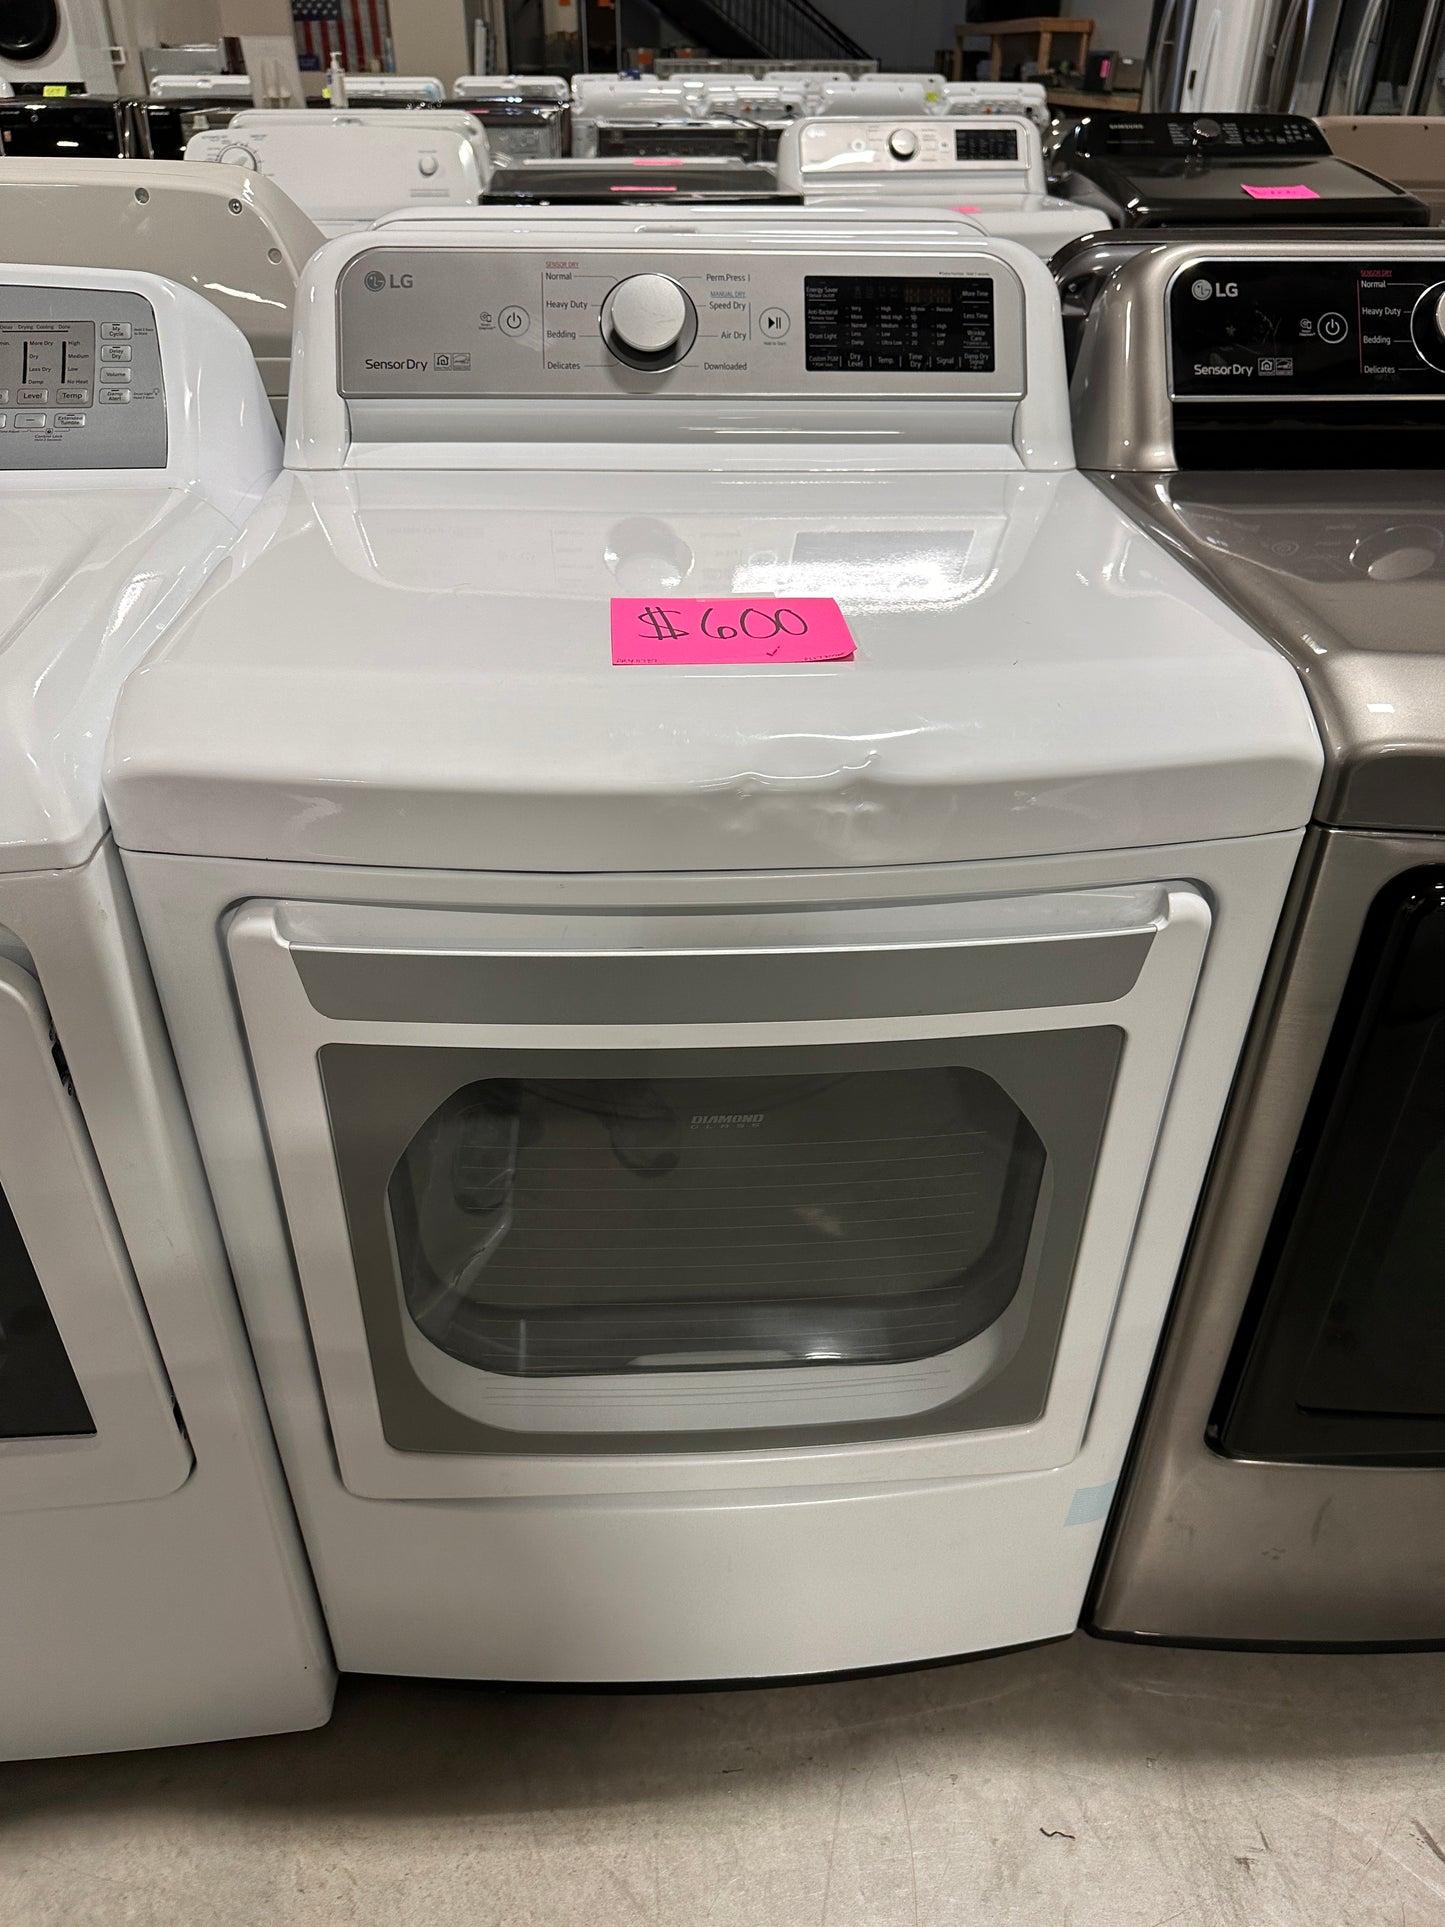 GREAT NEW LG 7.3 CU FT ELECTRIC DRYER - DRY11787 DLE7300WE